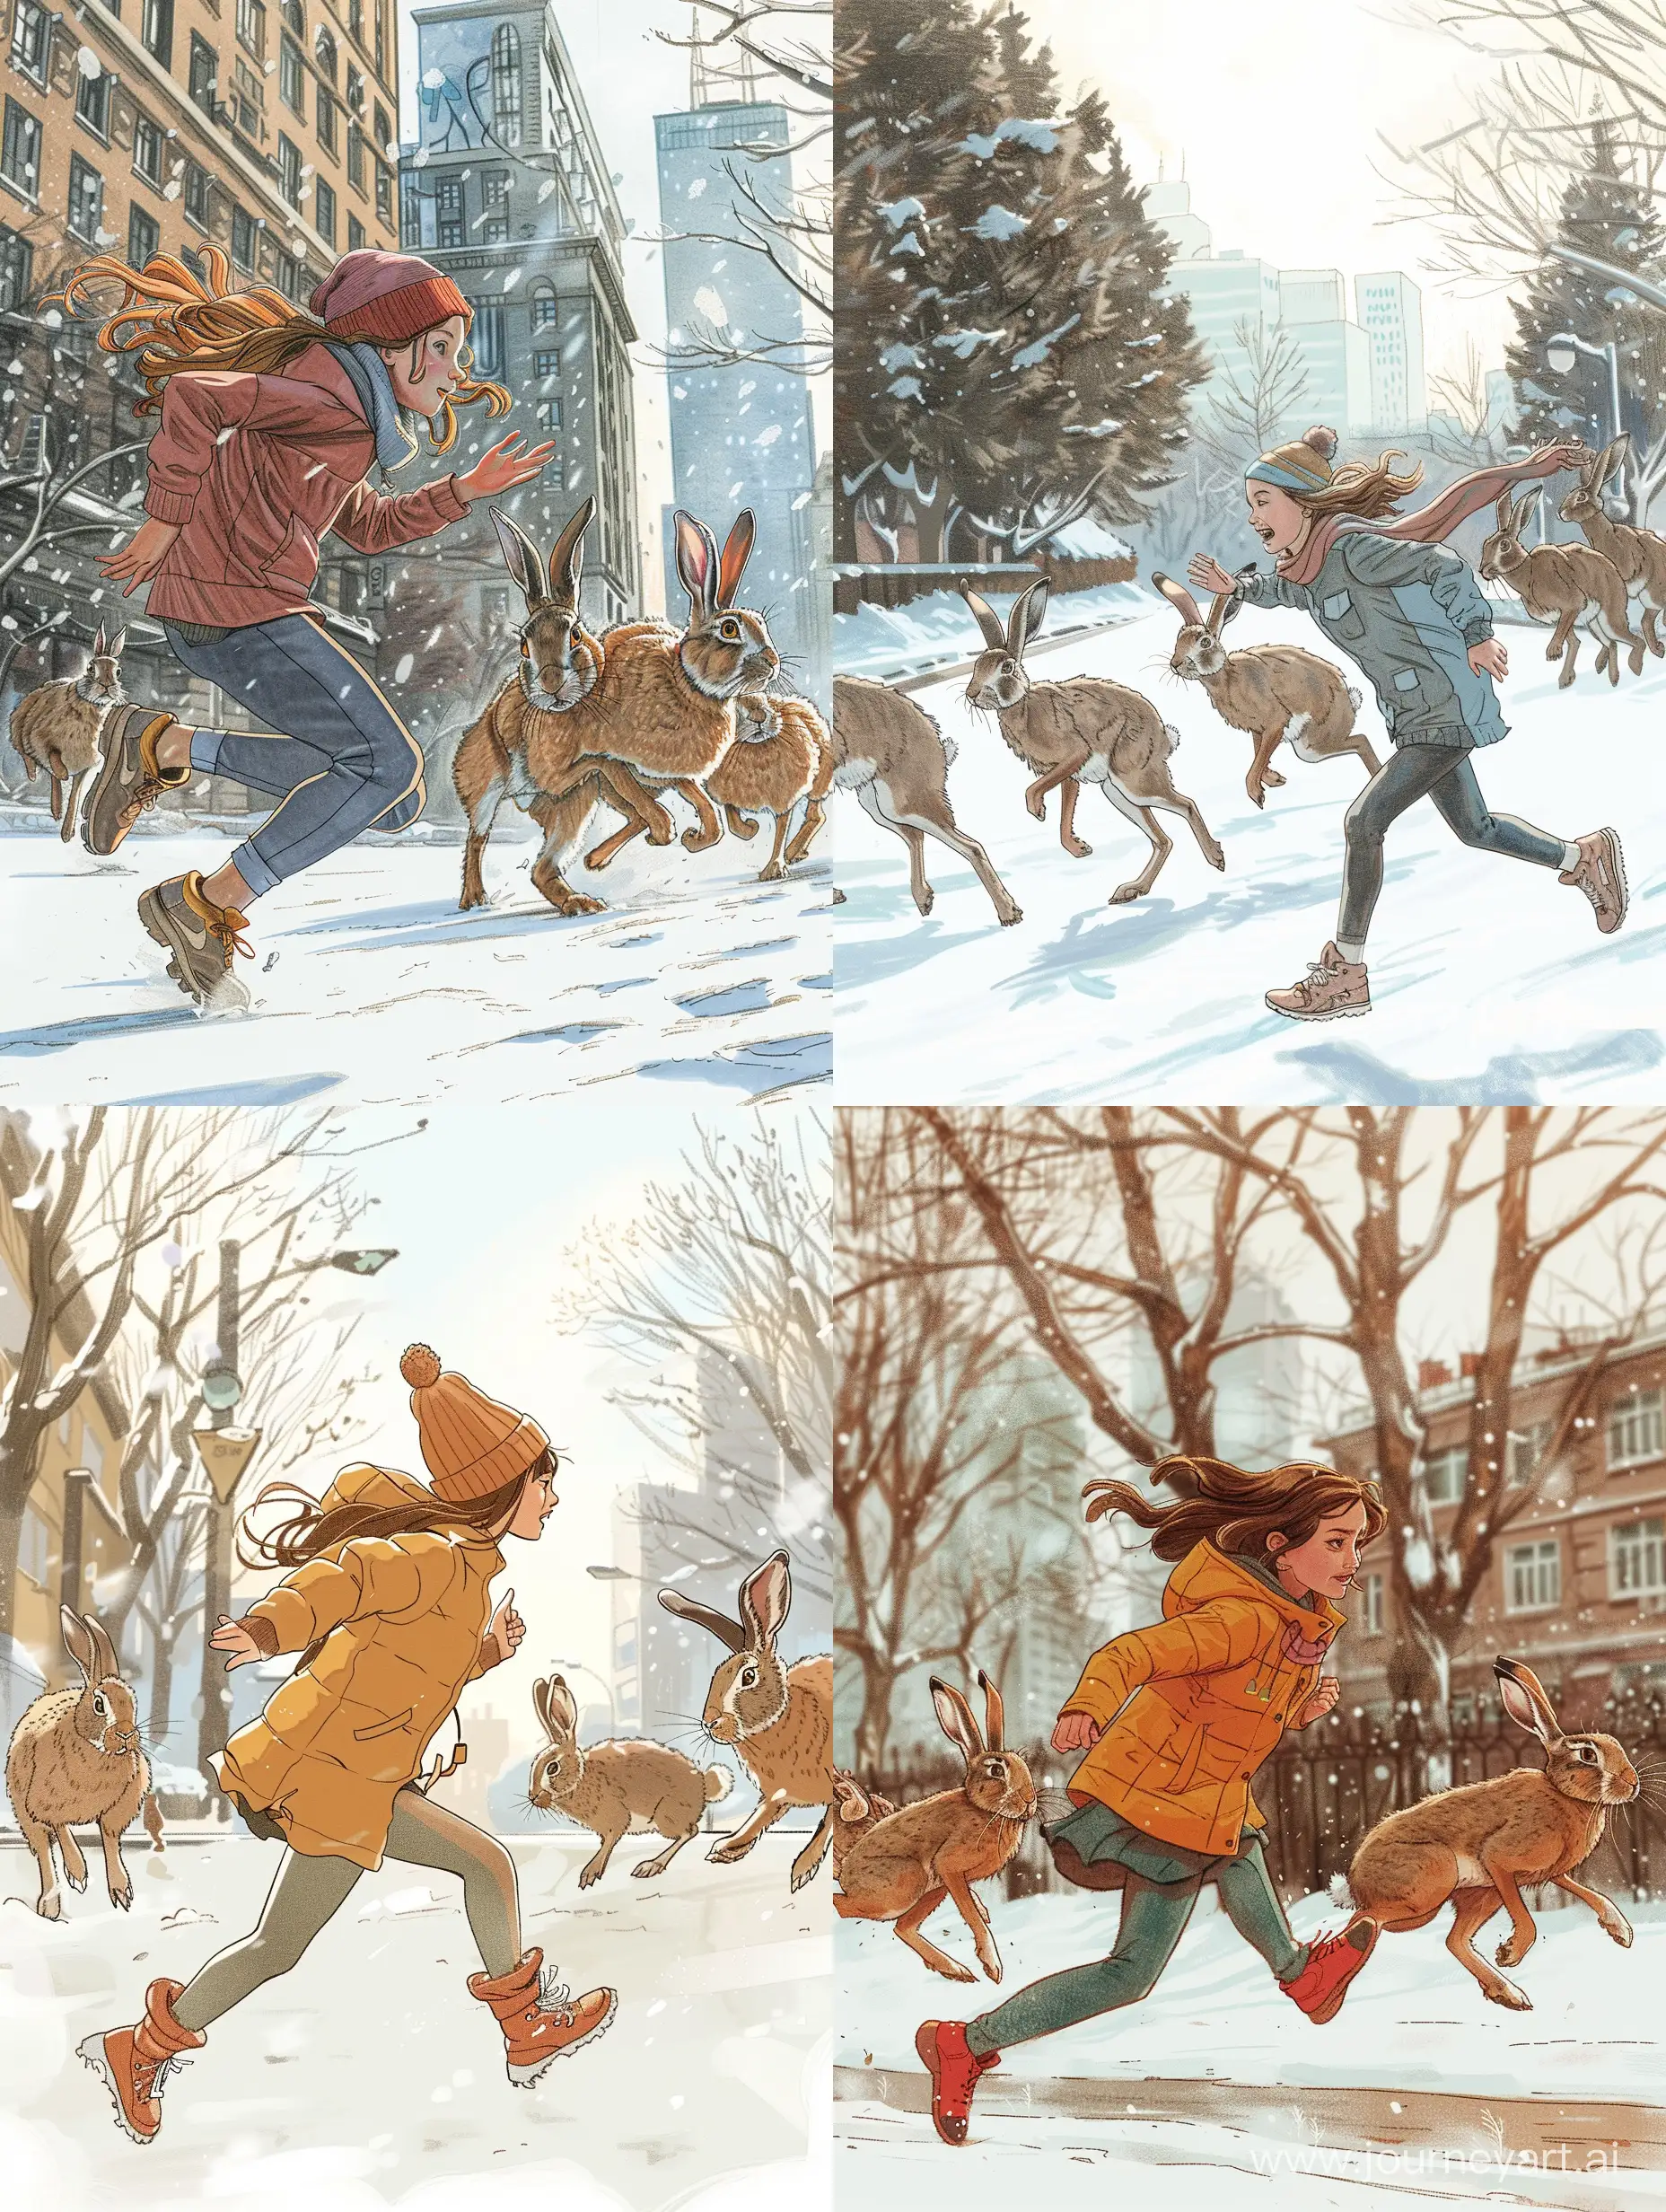 Teen-Girl-Running-from-Hares-in-Winter-Cityscape